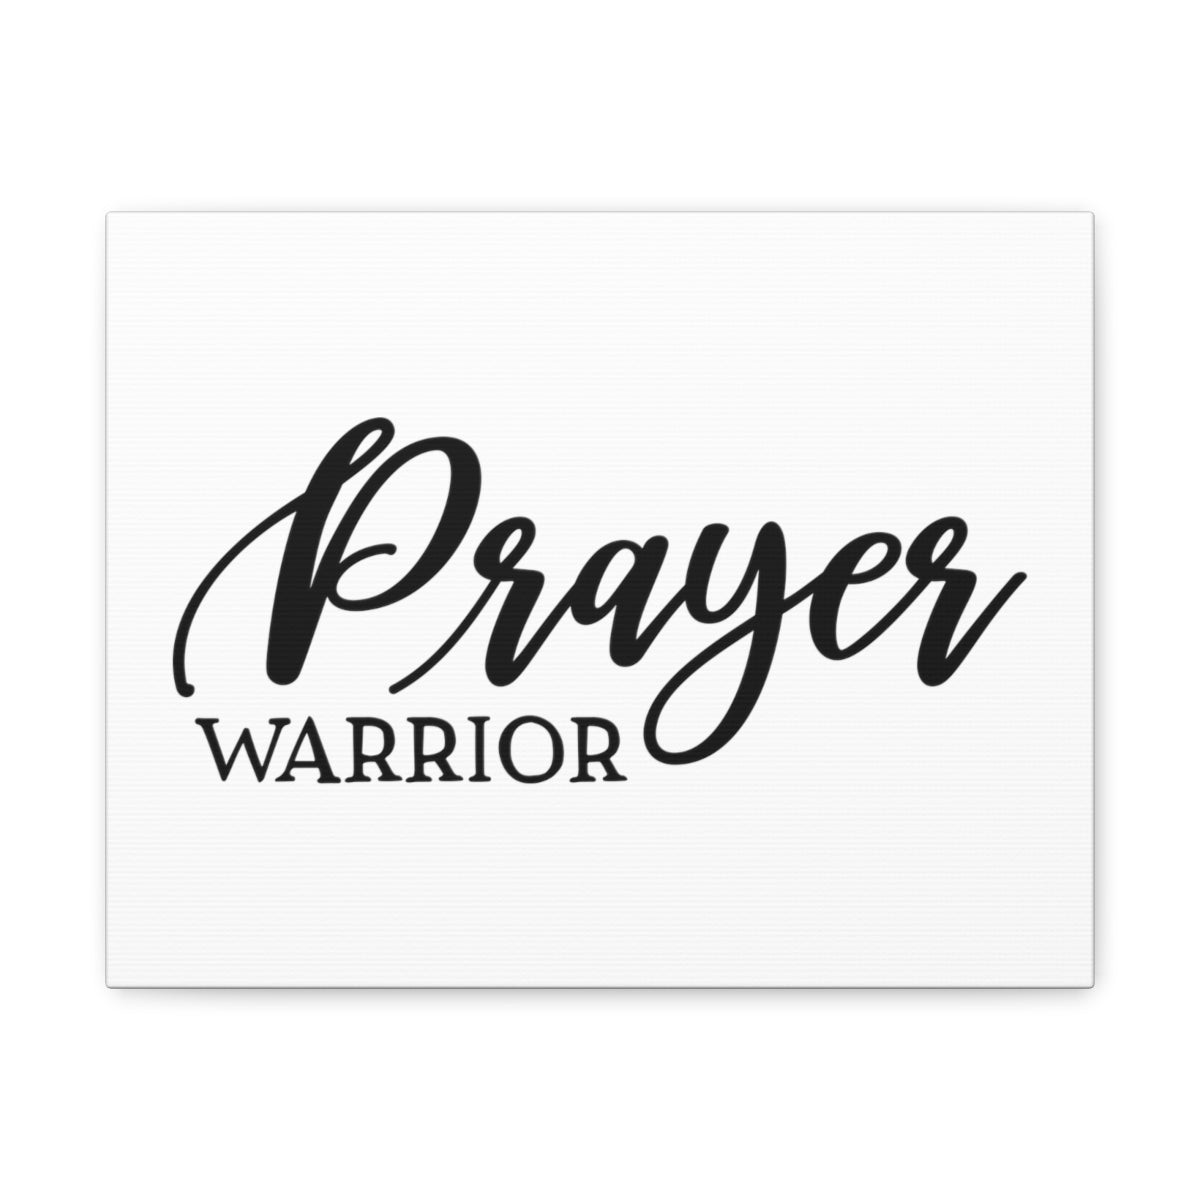 Scripture Walls Prayer Warrior 2 Chronicles 7:14 White Christian Wall Art Print Ready to Hang Unframed-Express Your Love Gifts